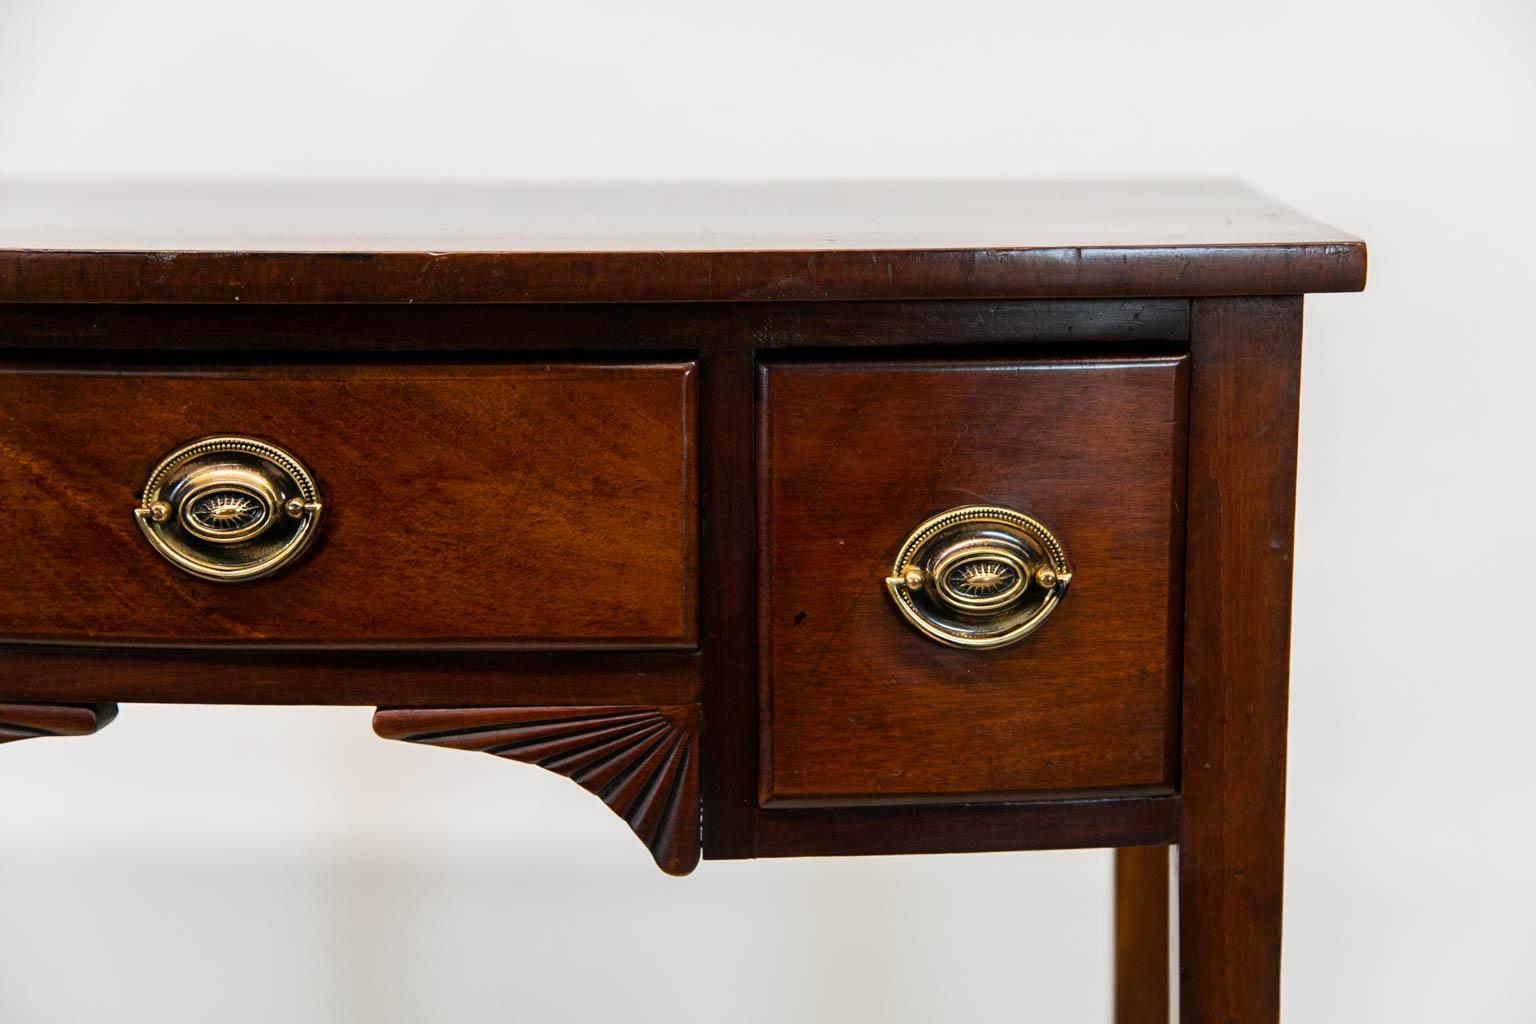 This mahogany server has a bowed front. The center apron has stylized carved fans. The hardware is later.